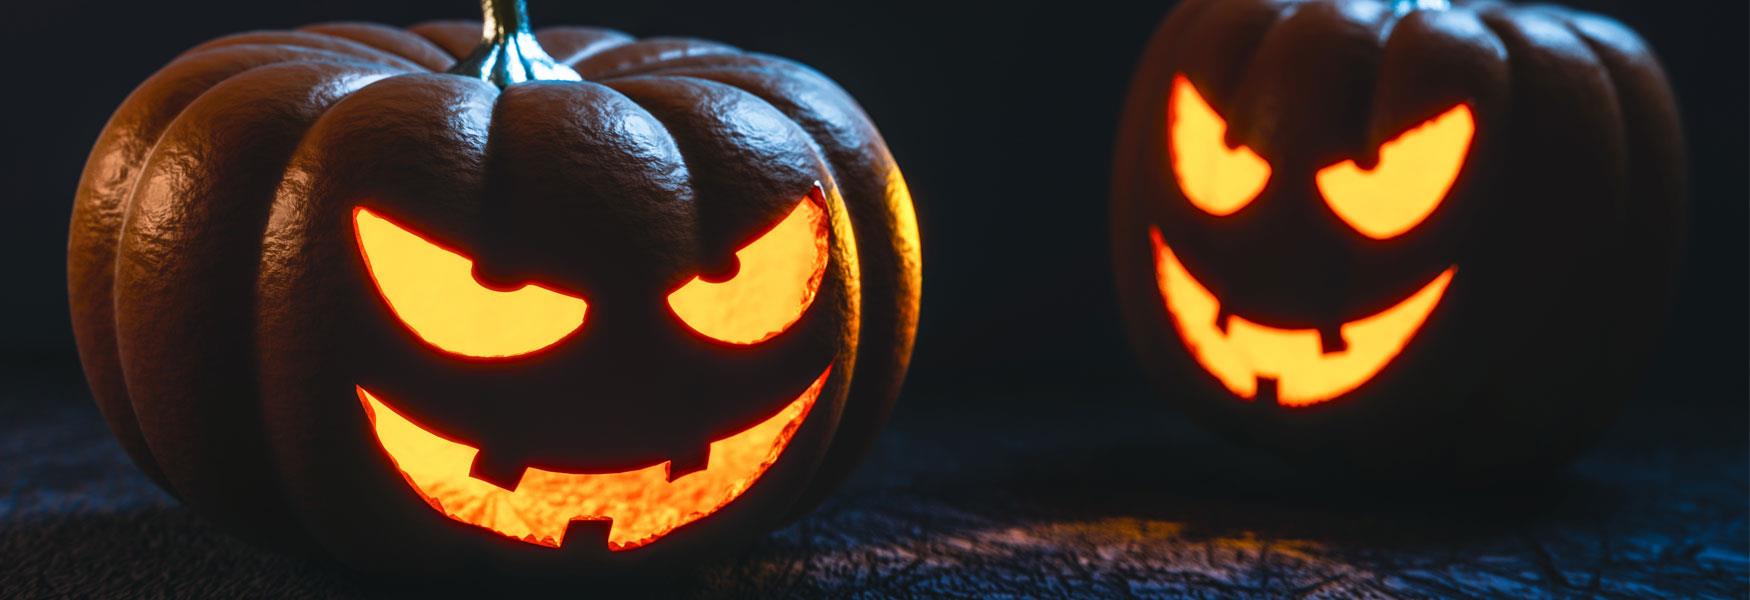 Halloween Events in and around Maidstone